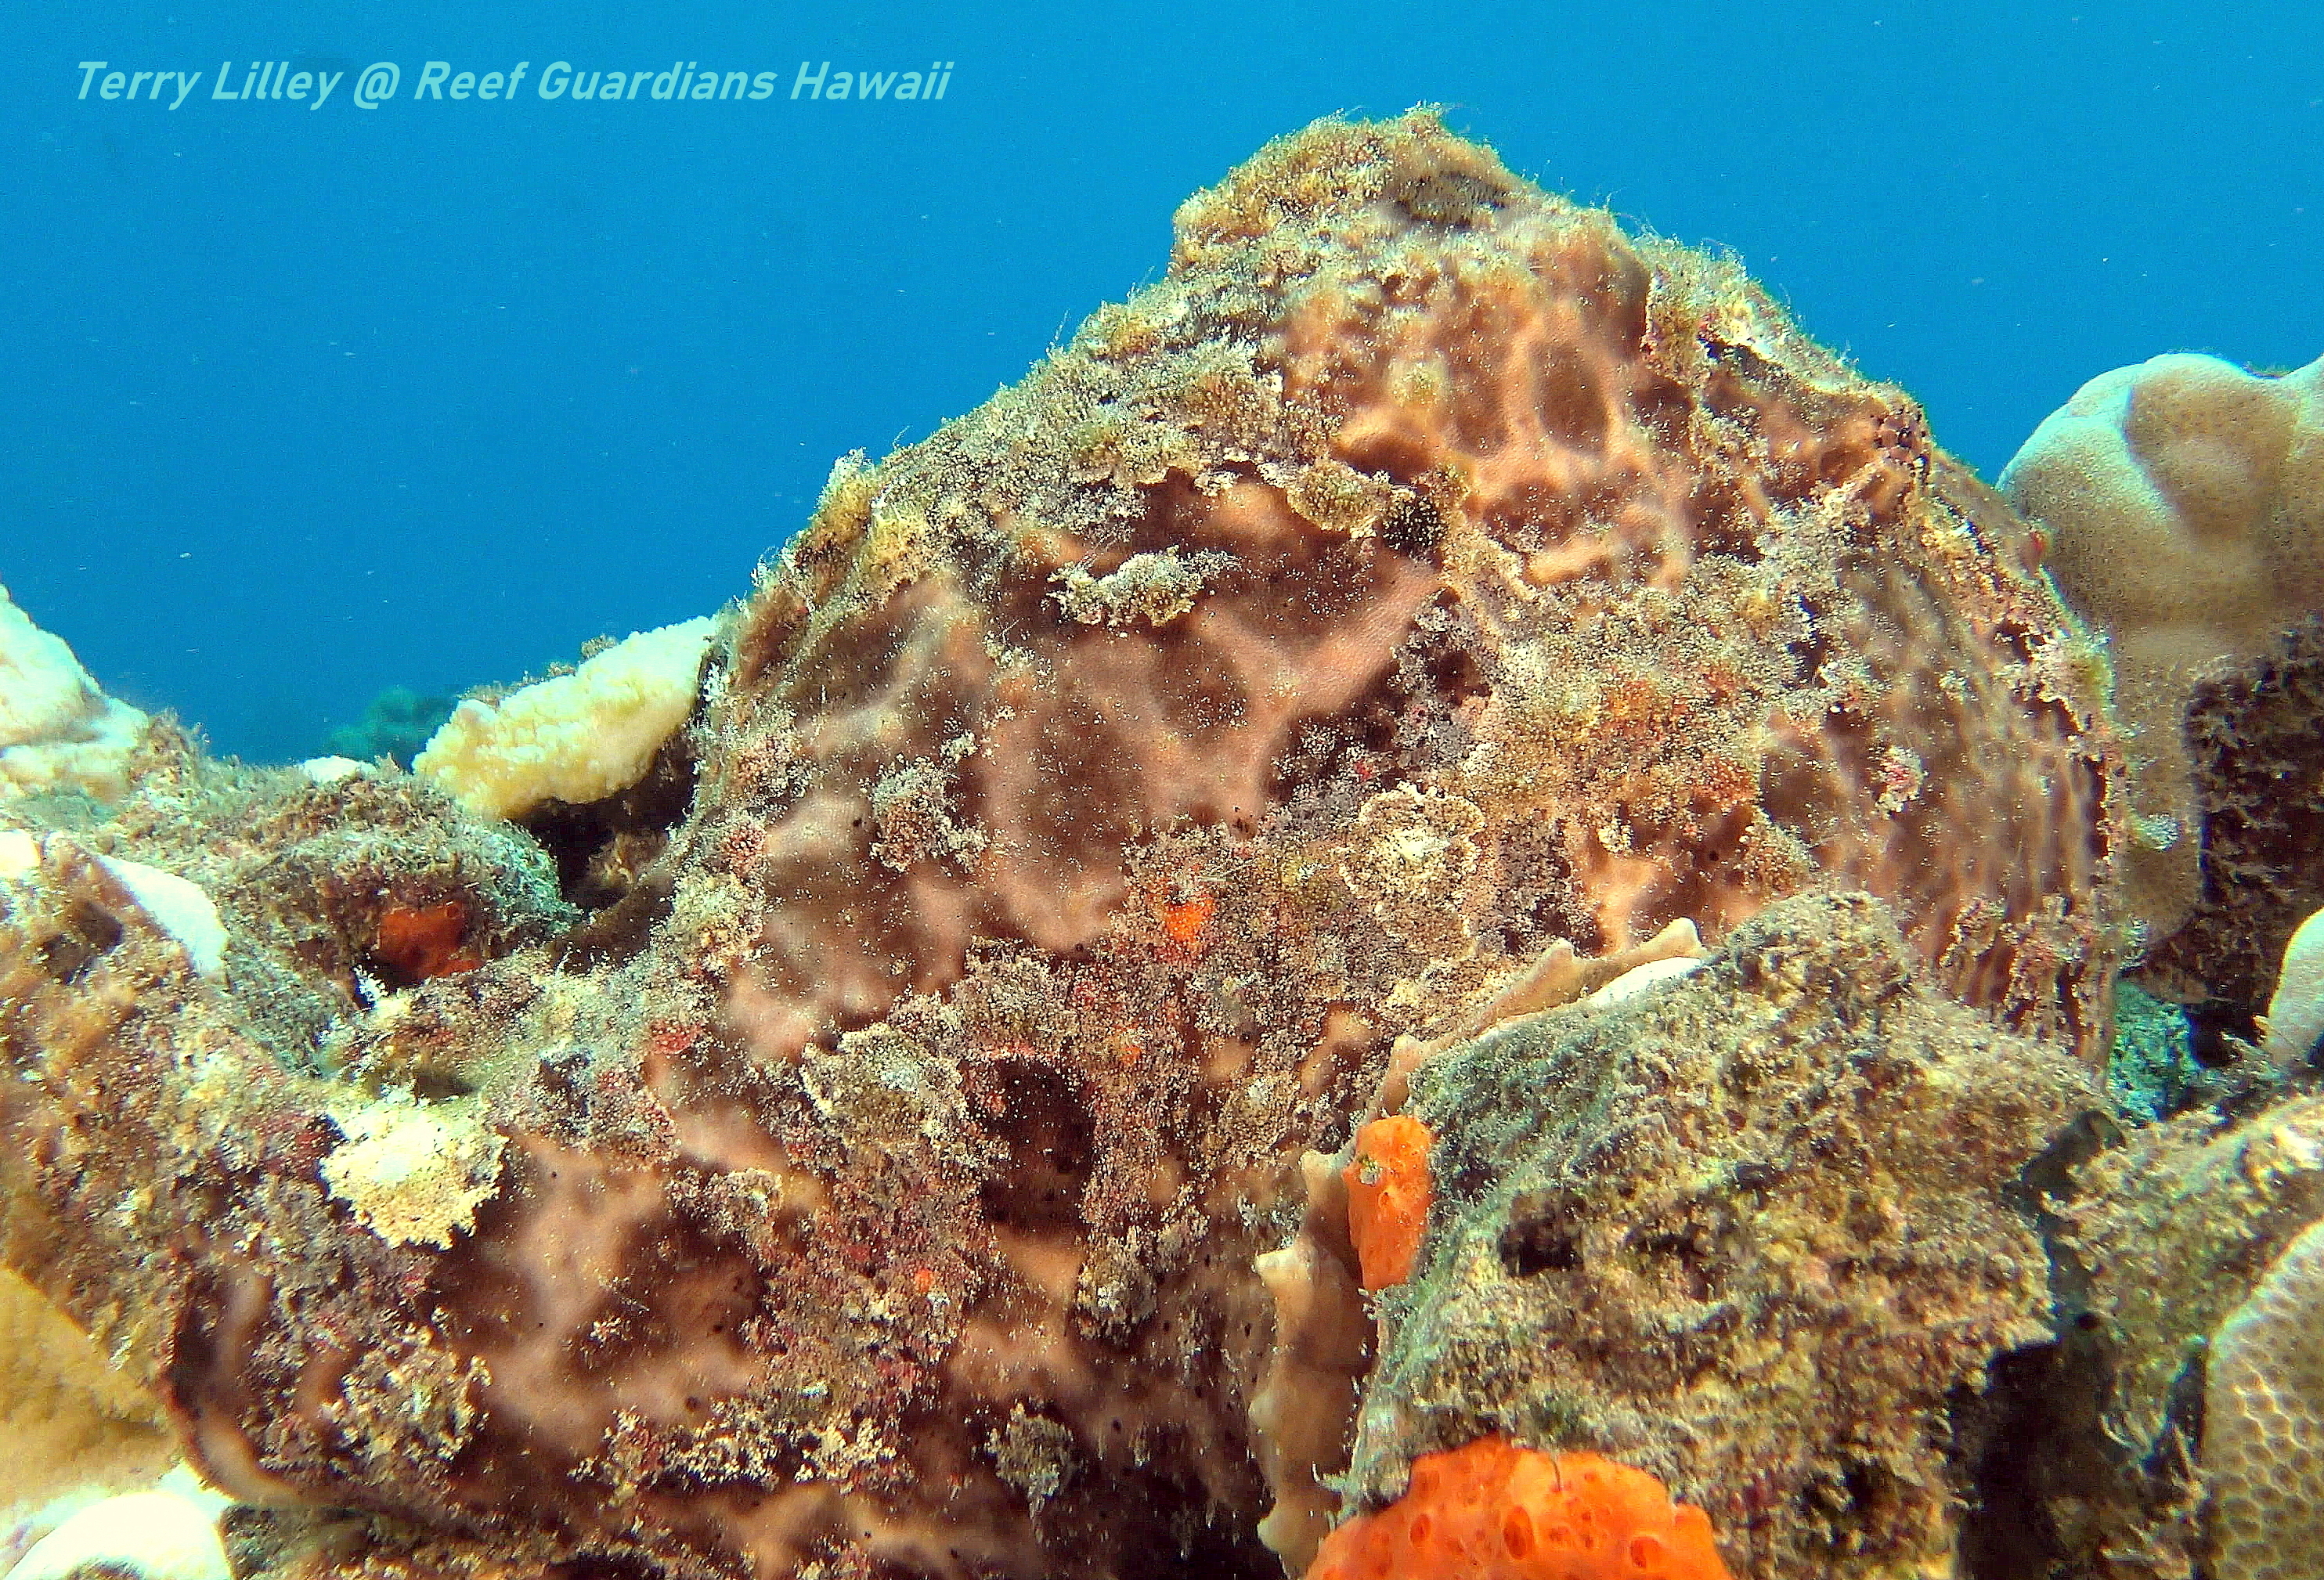 Freckled Frogfish